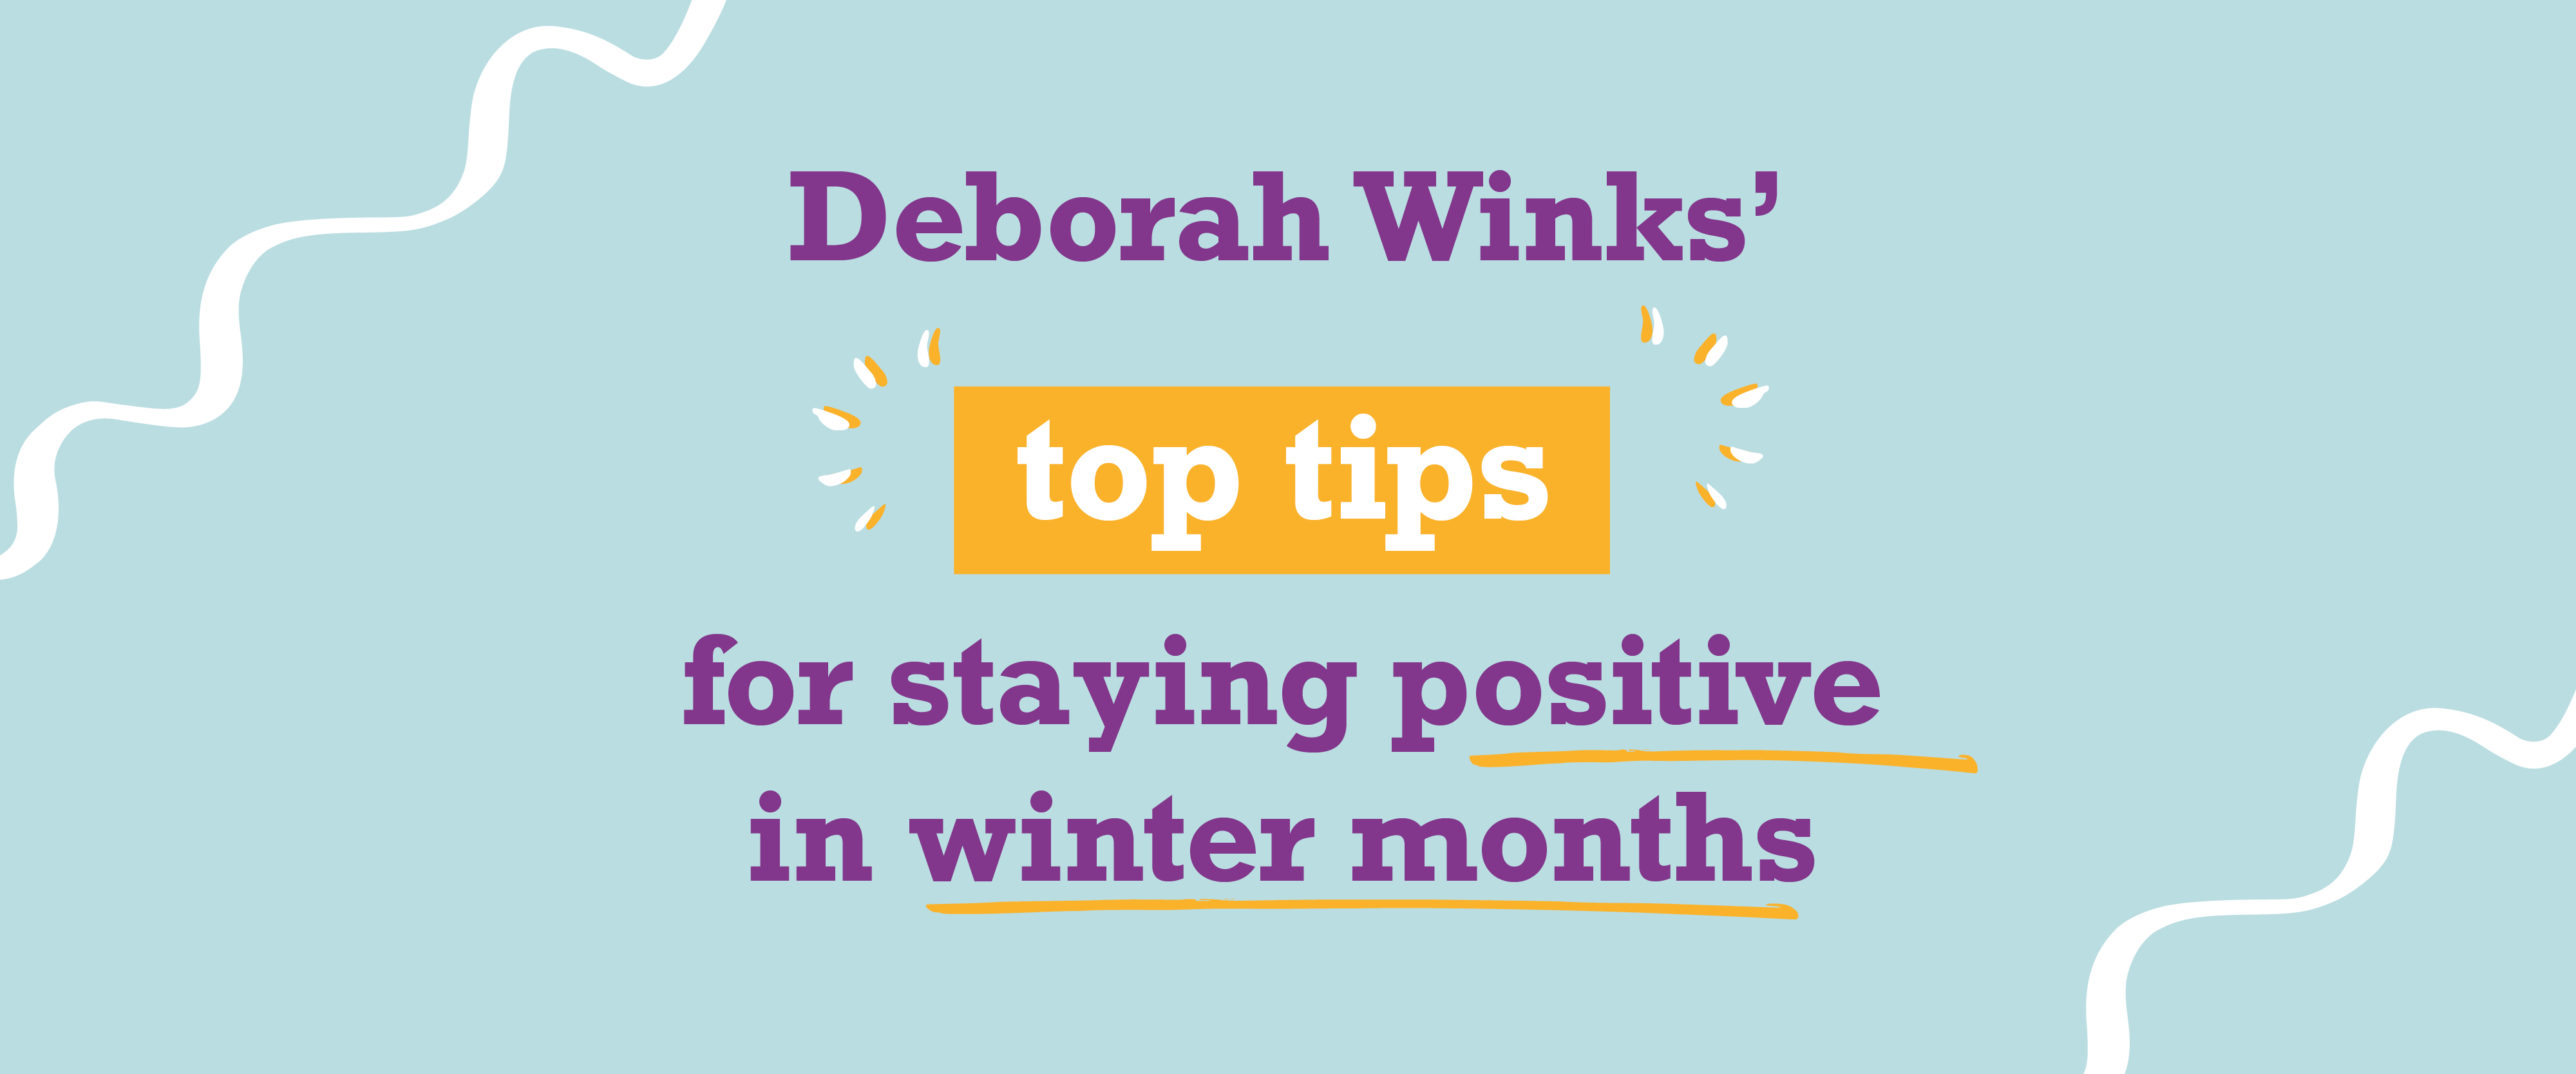 Top tips for staying positive in the winter